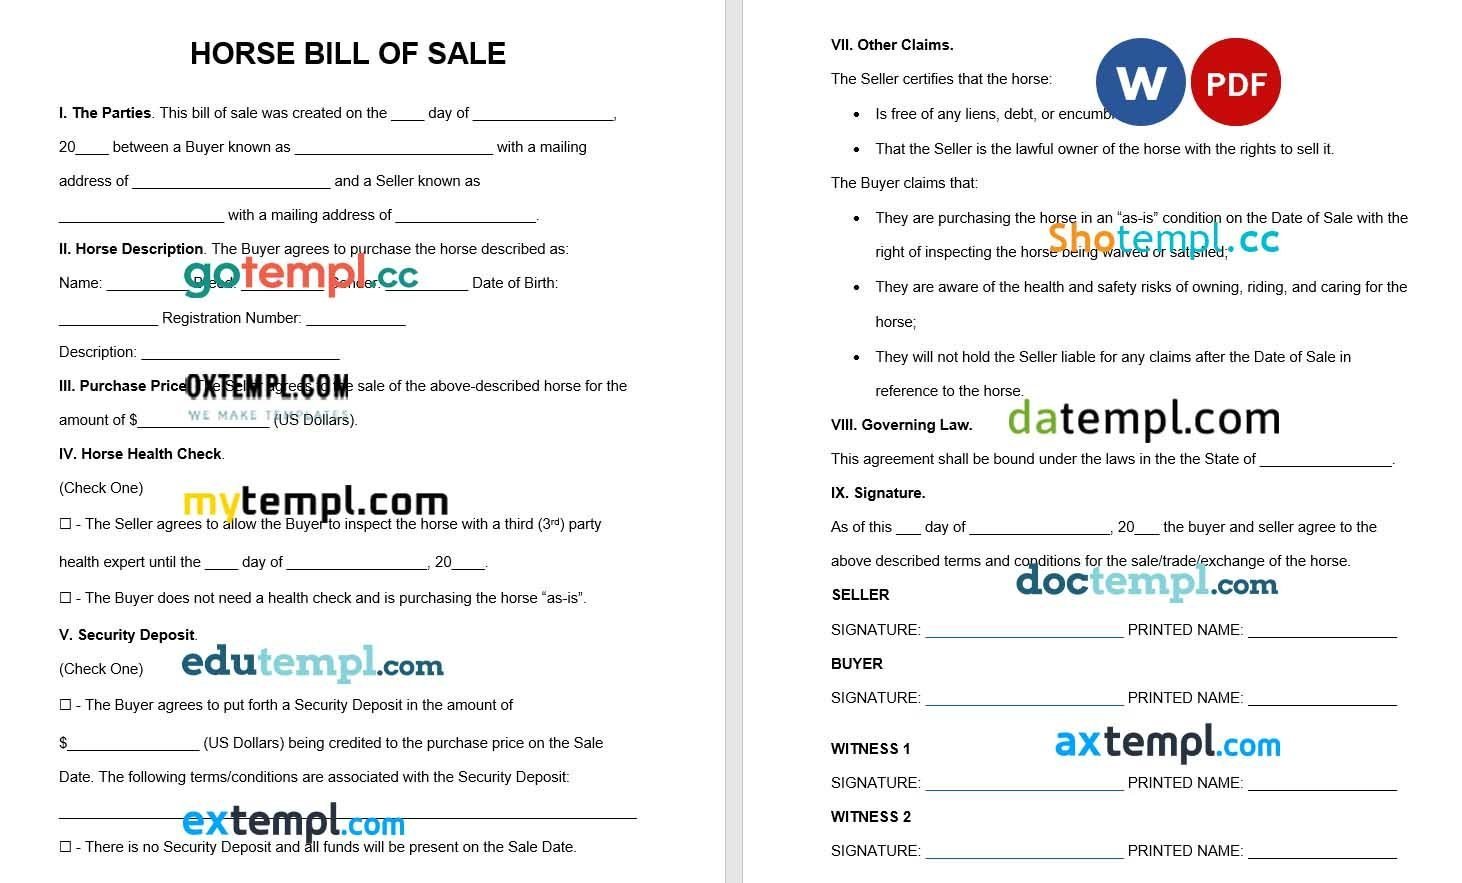 Horse Bill of Sale Form Word example, completely editable